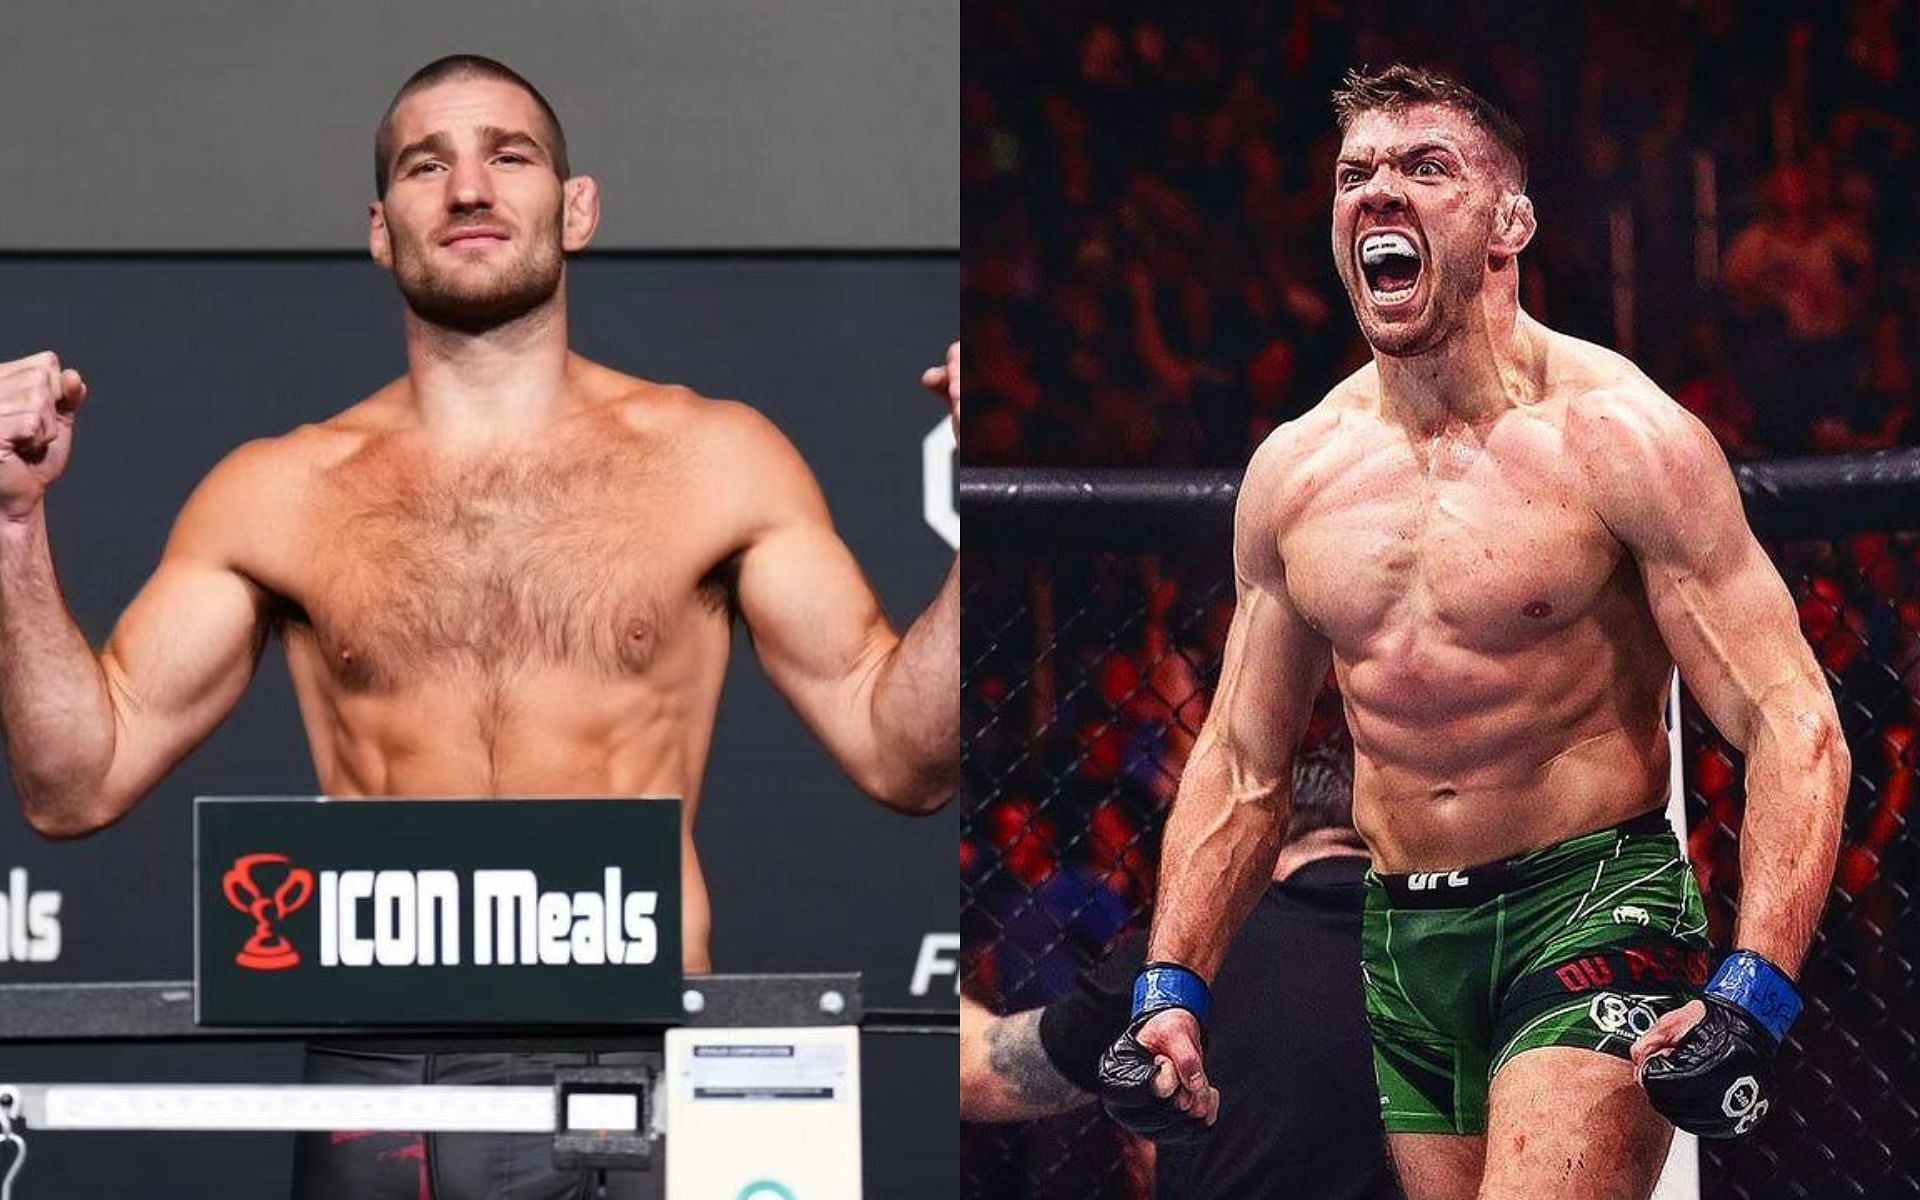 Sean Strickland (left) set to face Dricus du Plessis (right) at UFC 291 [Images courtesy @stricklandmma and @dricusduplessis  on Instagram]